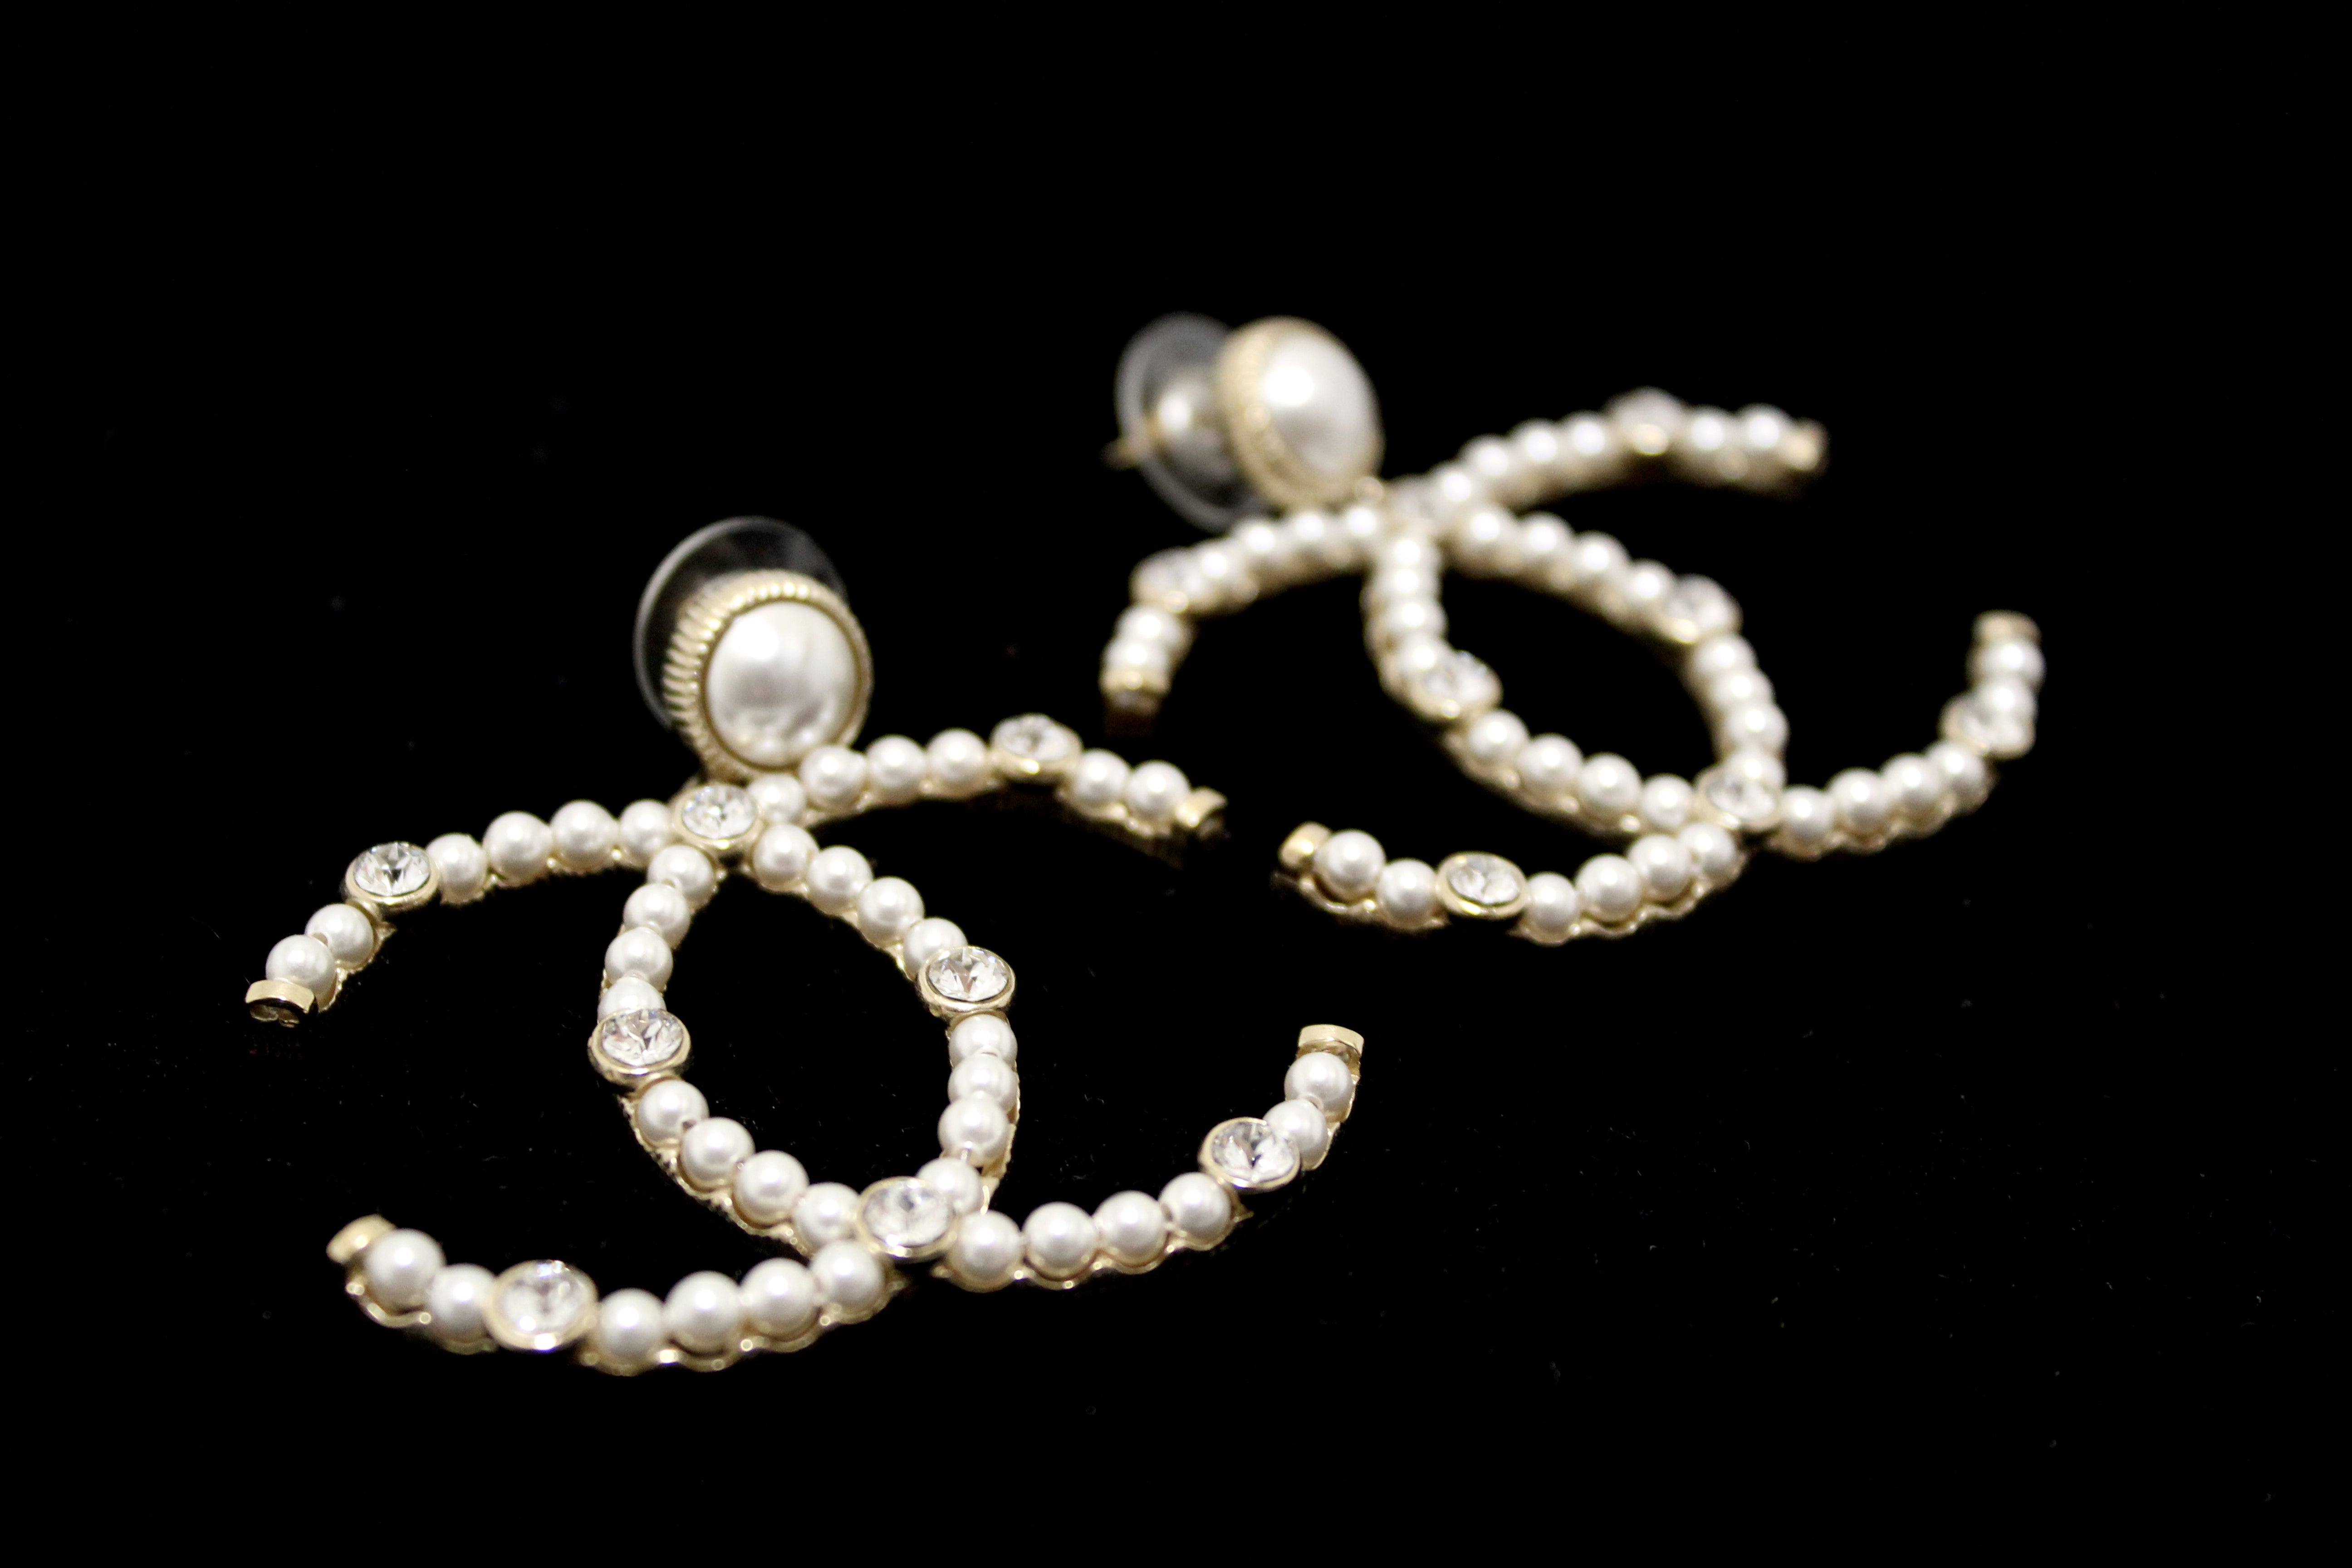 Authentic Chanel Classic CC Gold-Tone Timeless Pearl Earrings